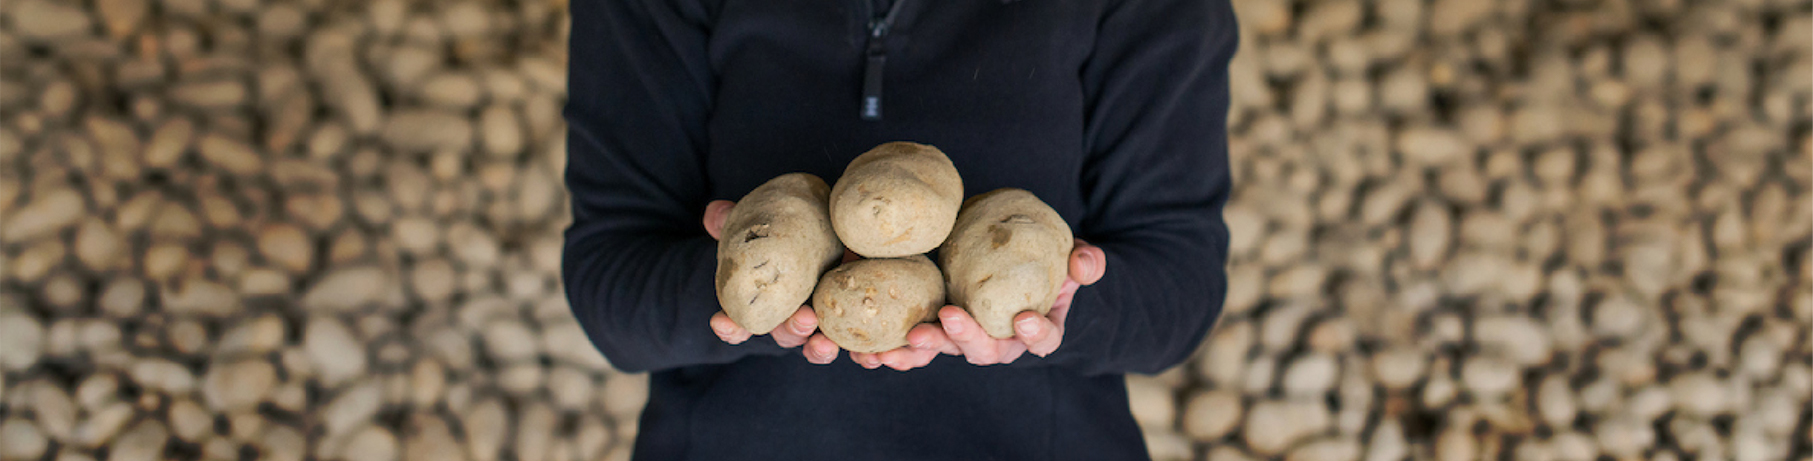 Person holding four potatoes